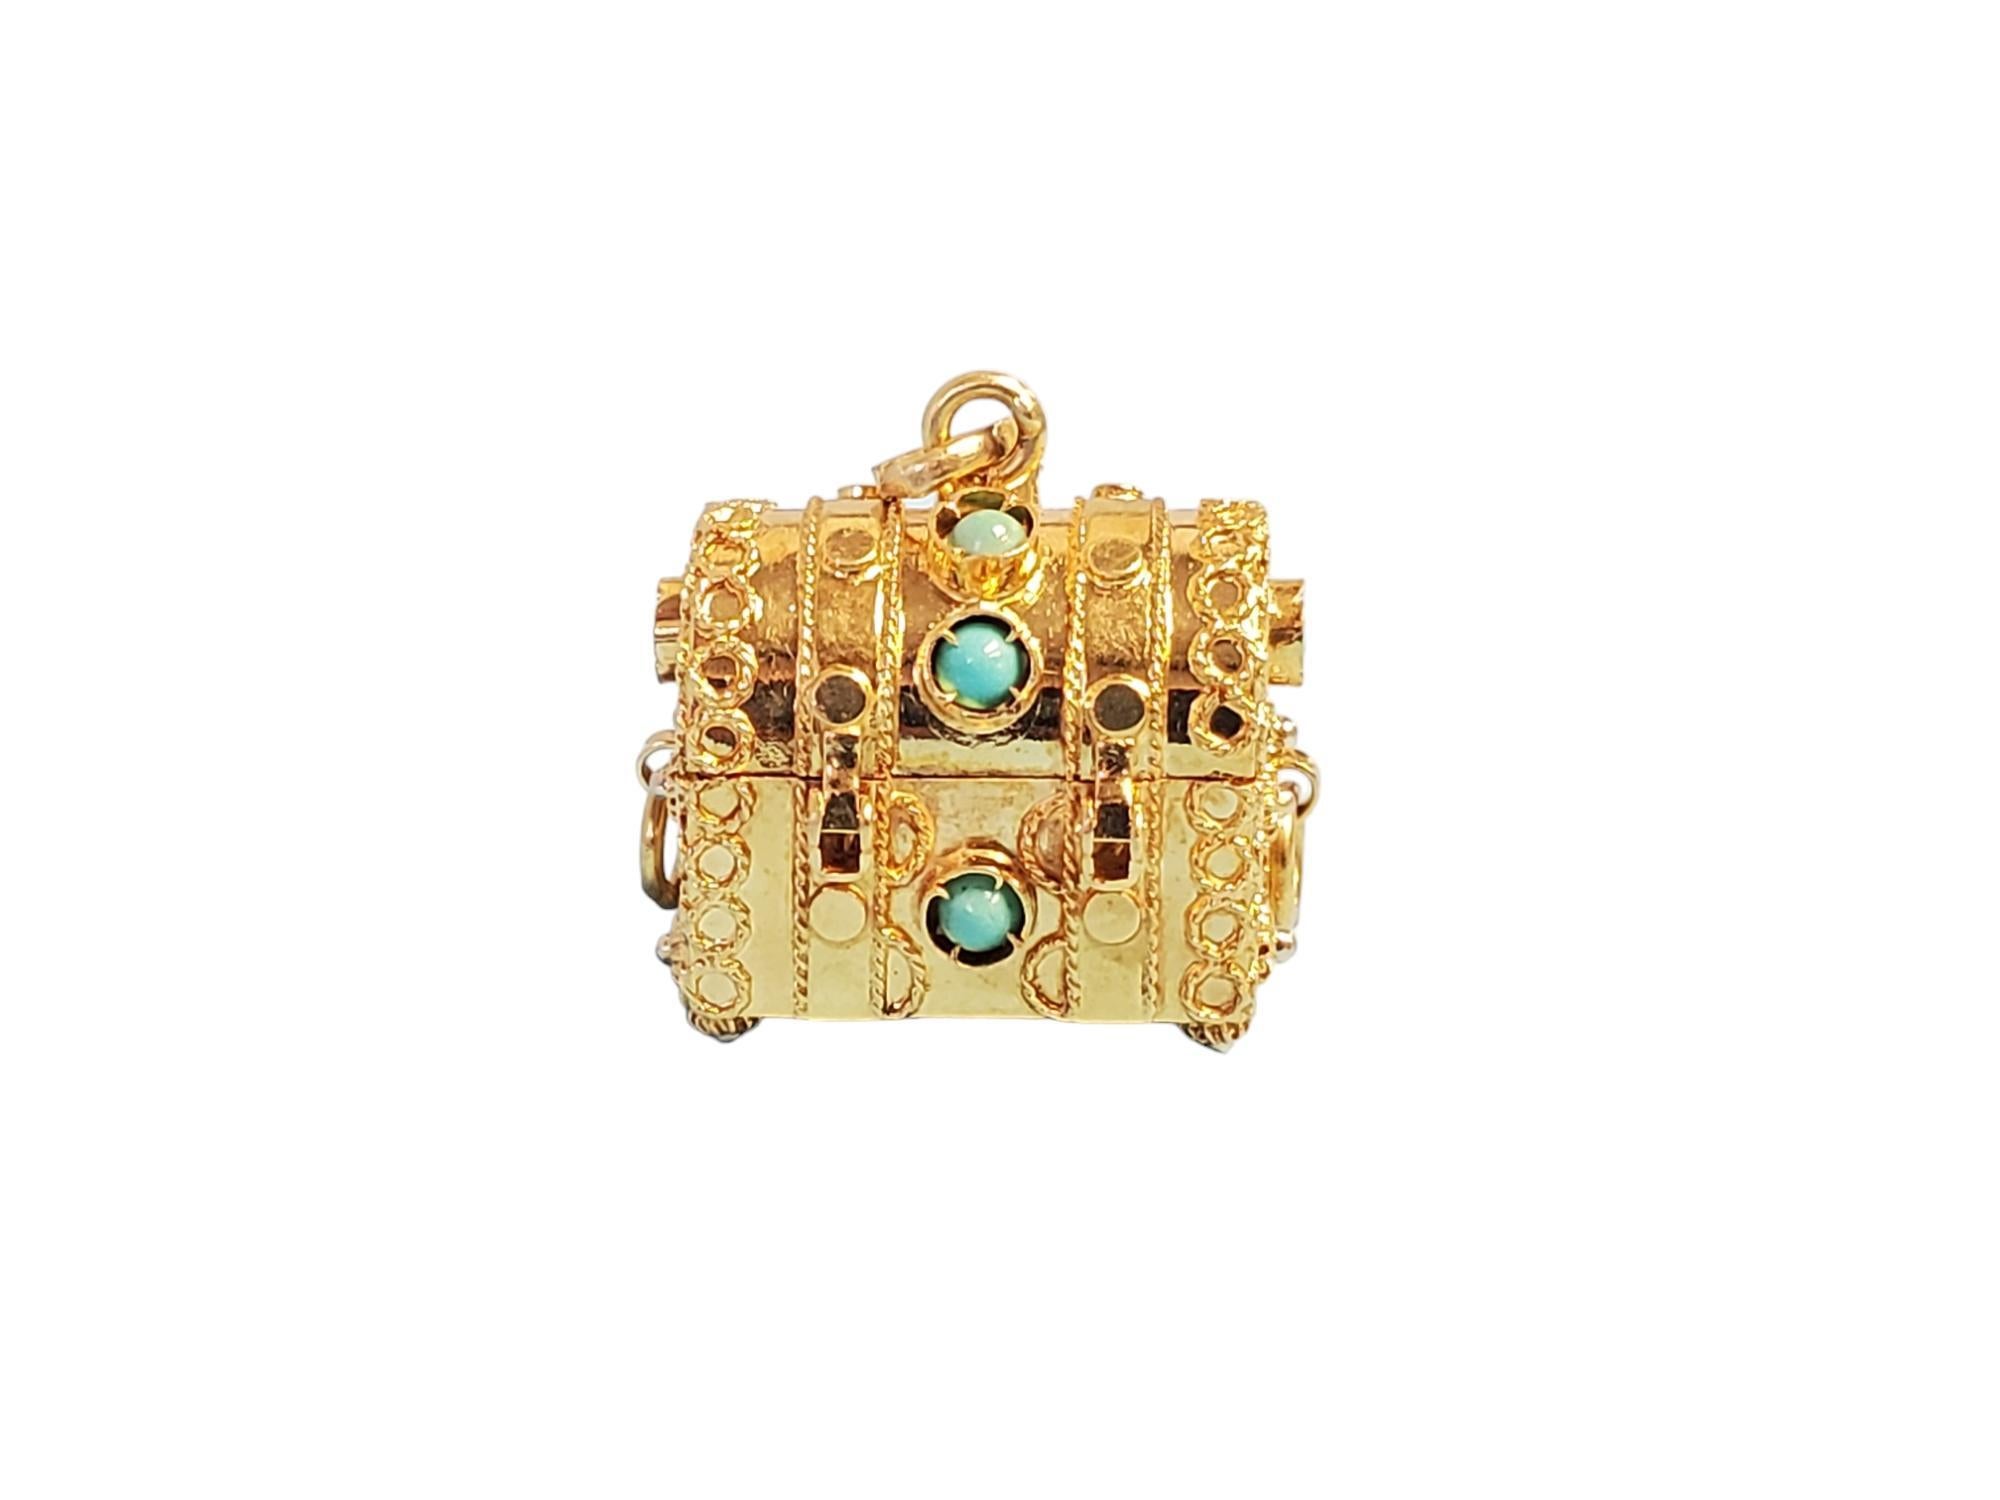 This listing is for a wonderfully maintained 18k yellow gold vintage treasure chest pendant charm that opens and closes securely. 
Its is very good condition and ready to be worn. Its stamped 18k on the bale and has been tested for fineness. 
The